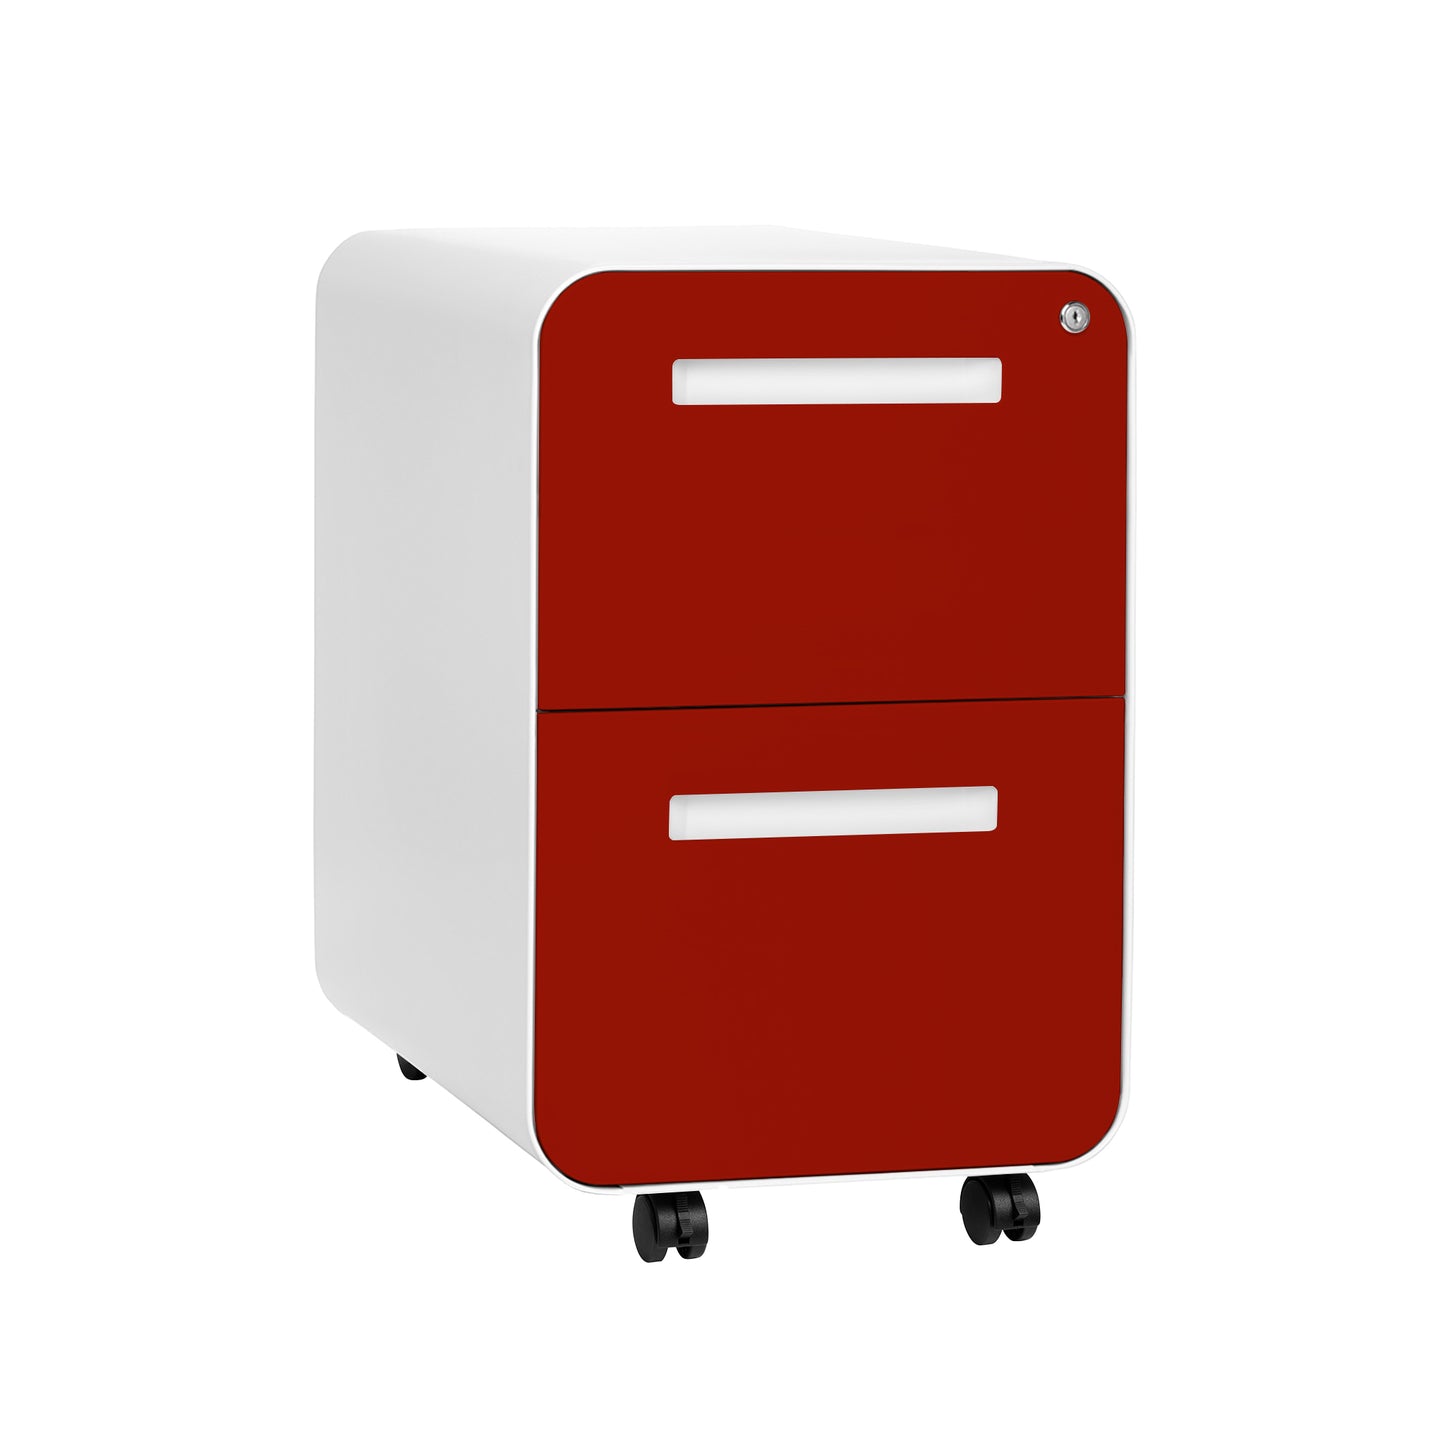 Stockpile Curve 2-Drawer File Cabinet (Red Faceplate)